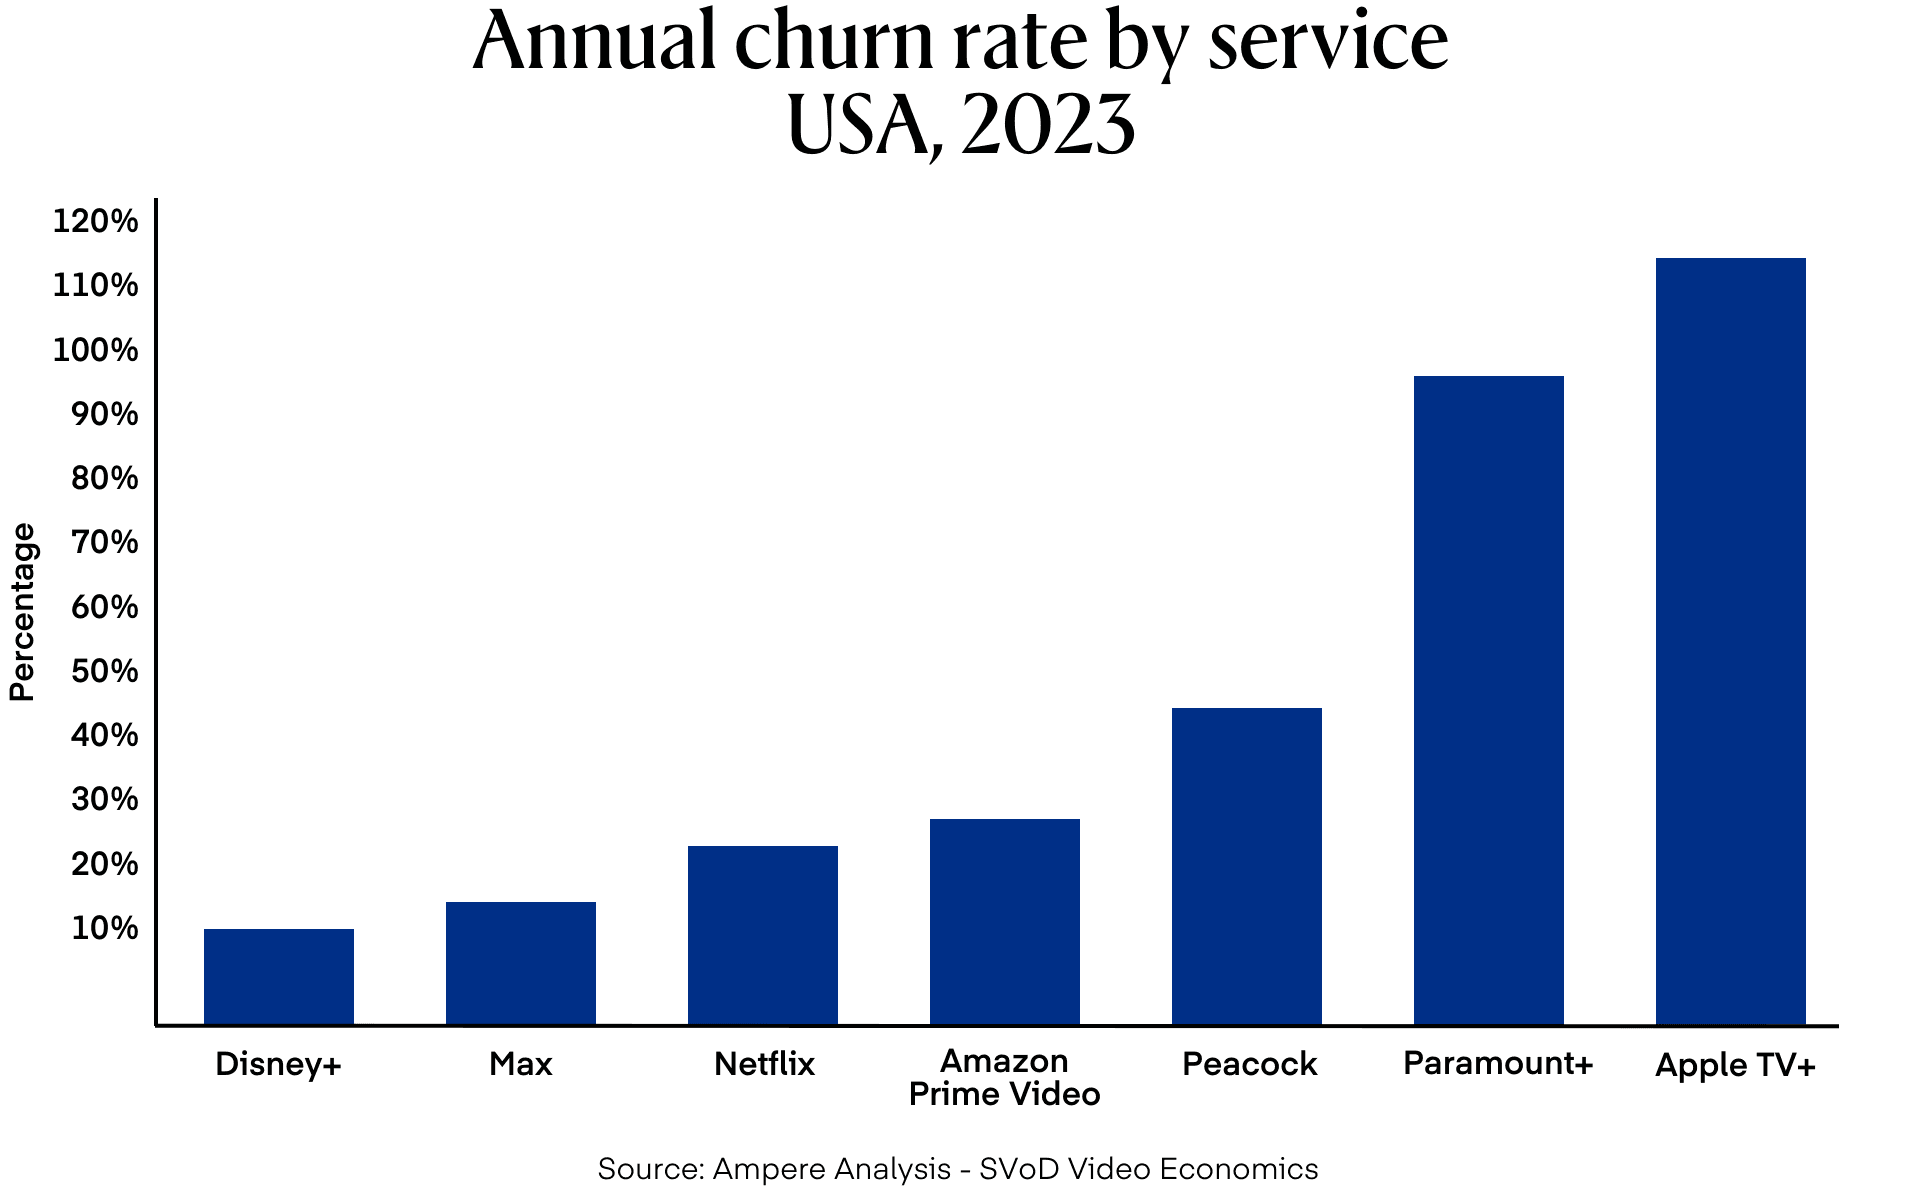 Annual churn rate by service graph showing USA data from 2023.